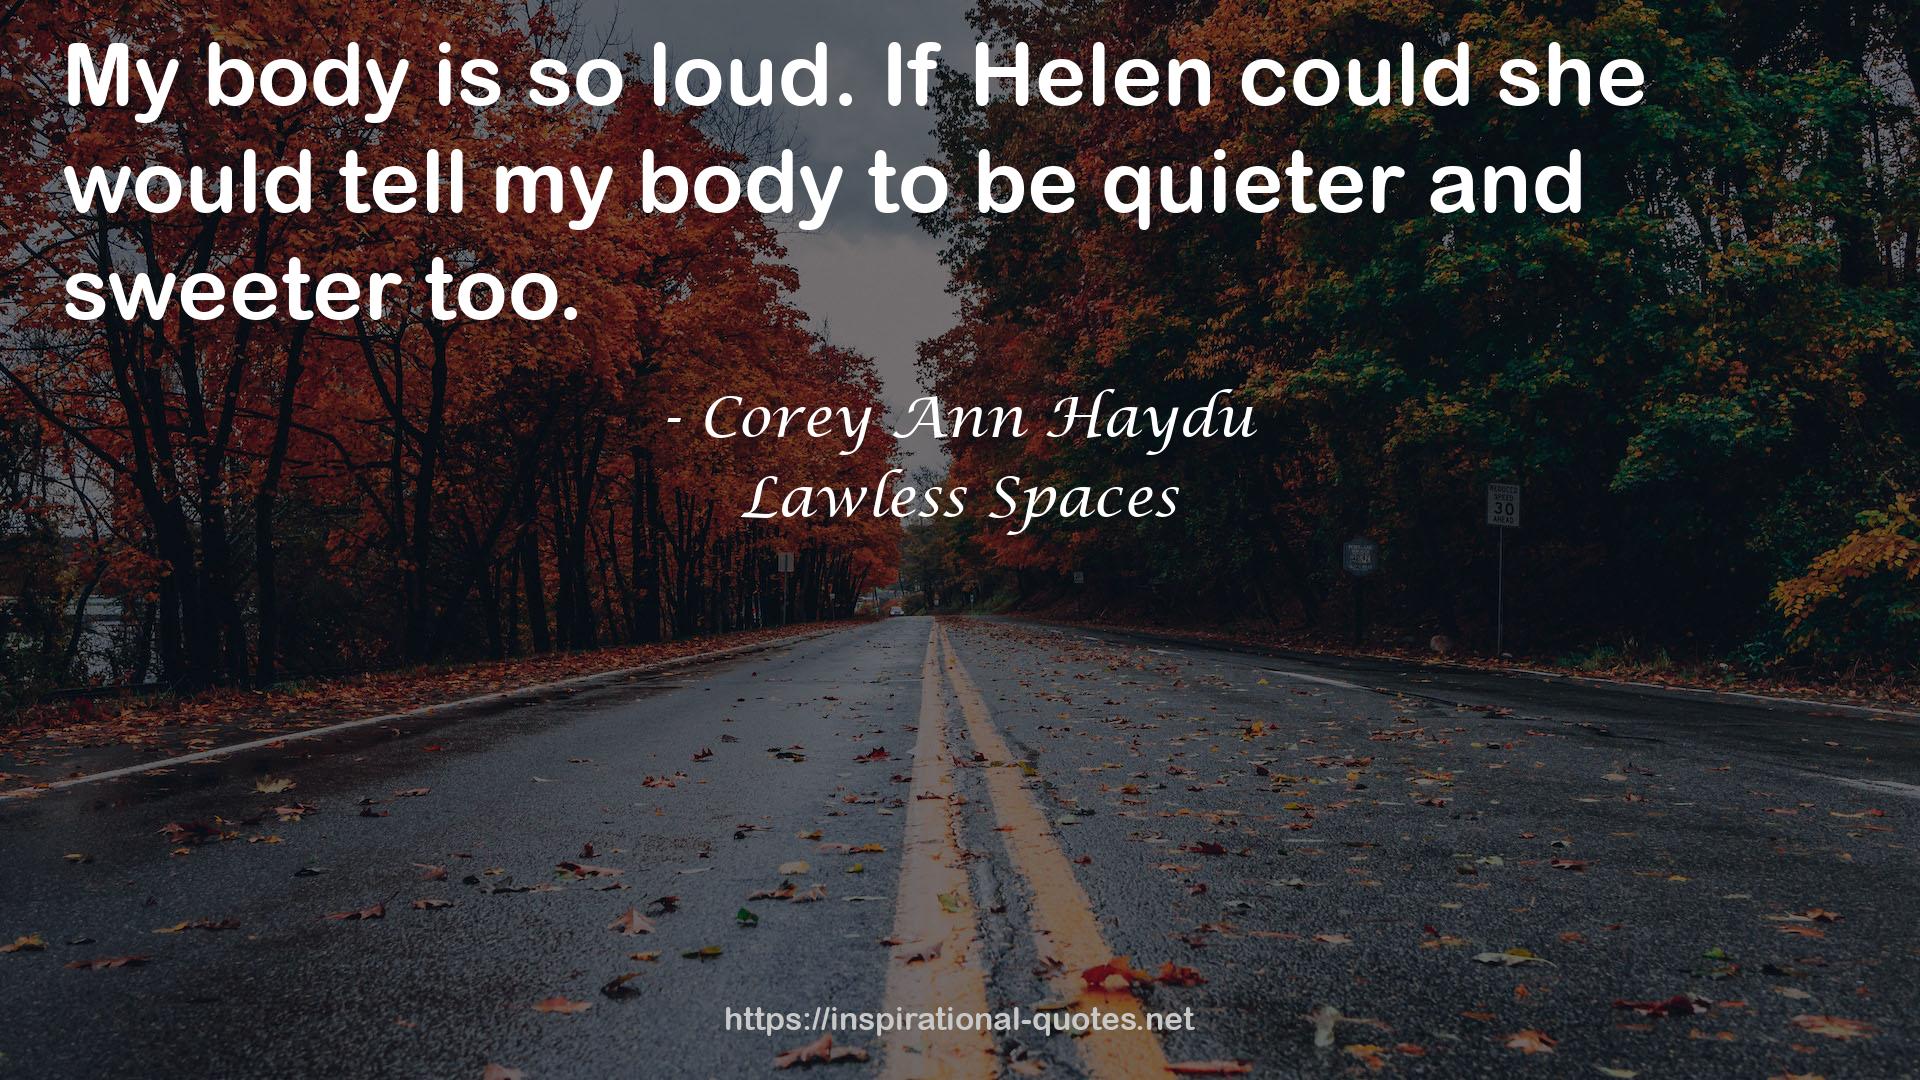 Lawless Spaces QUOTES